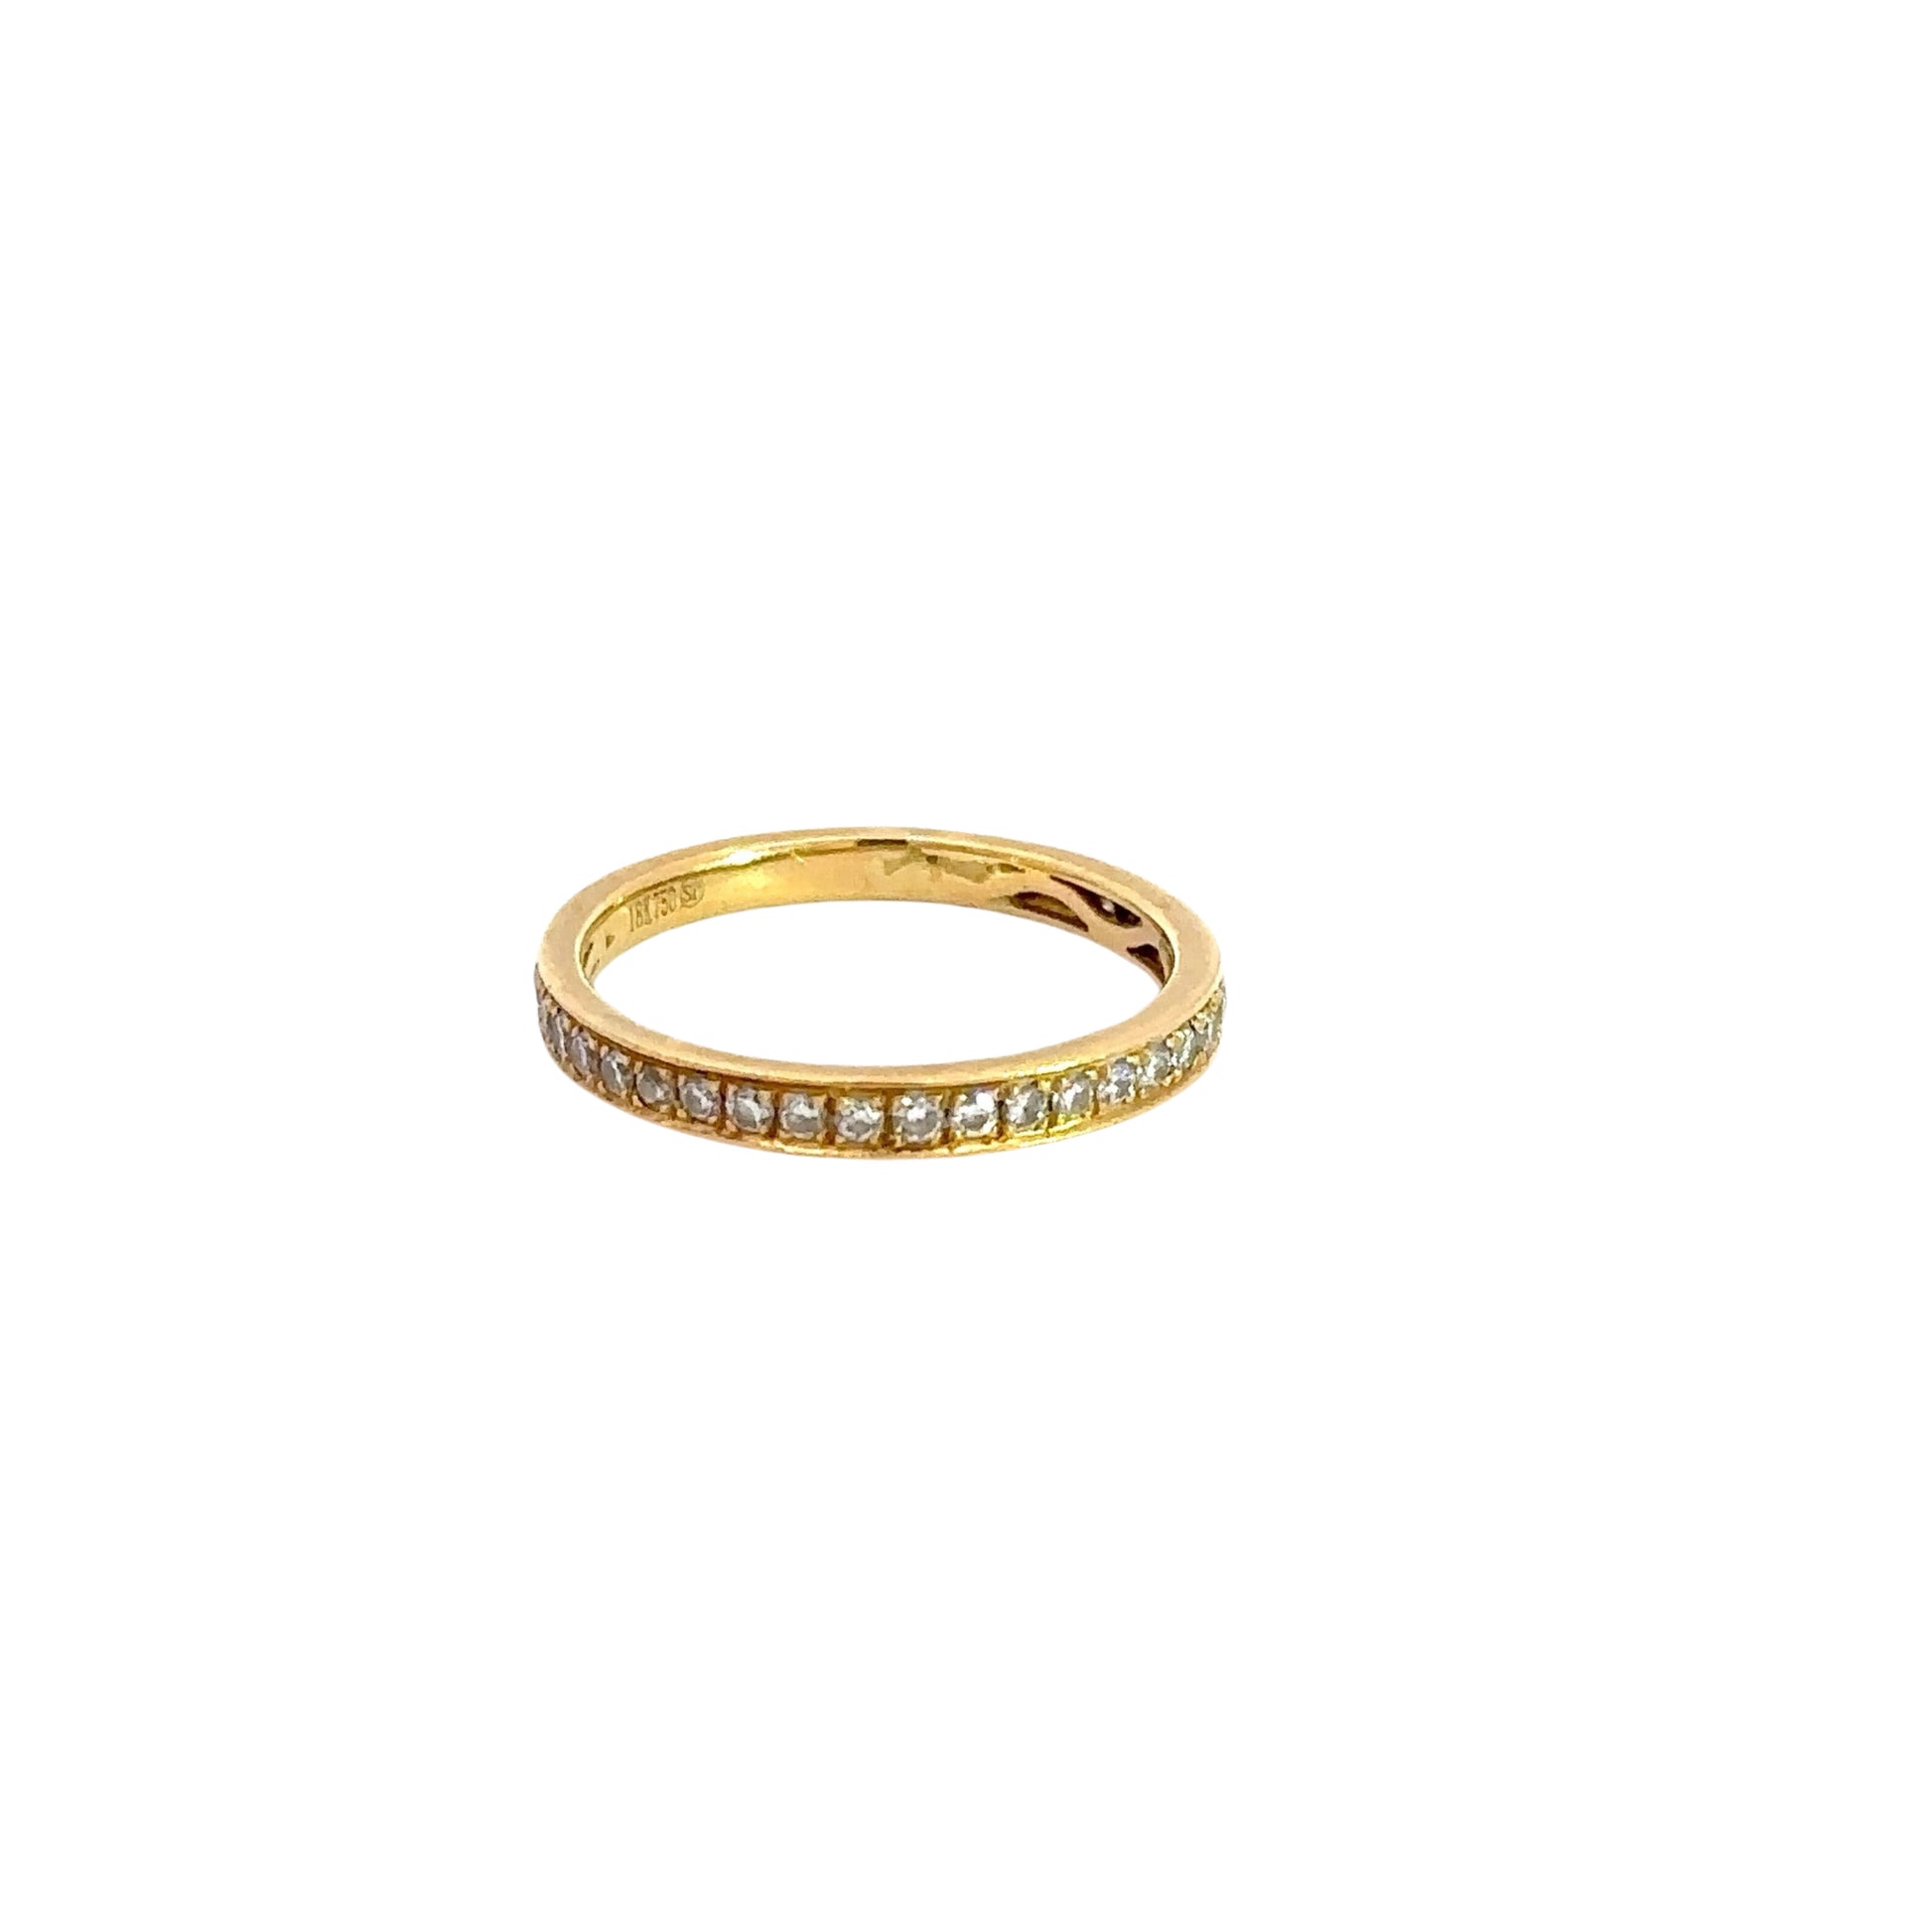 Front of yellow gold ring with small round diamonds.